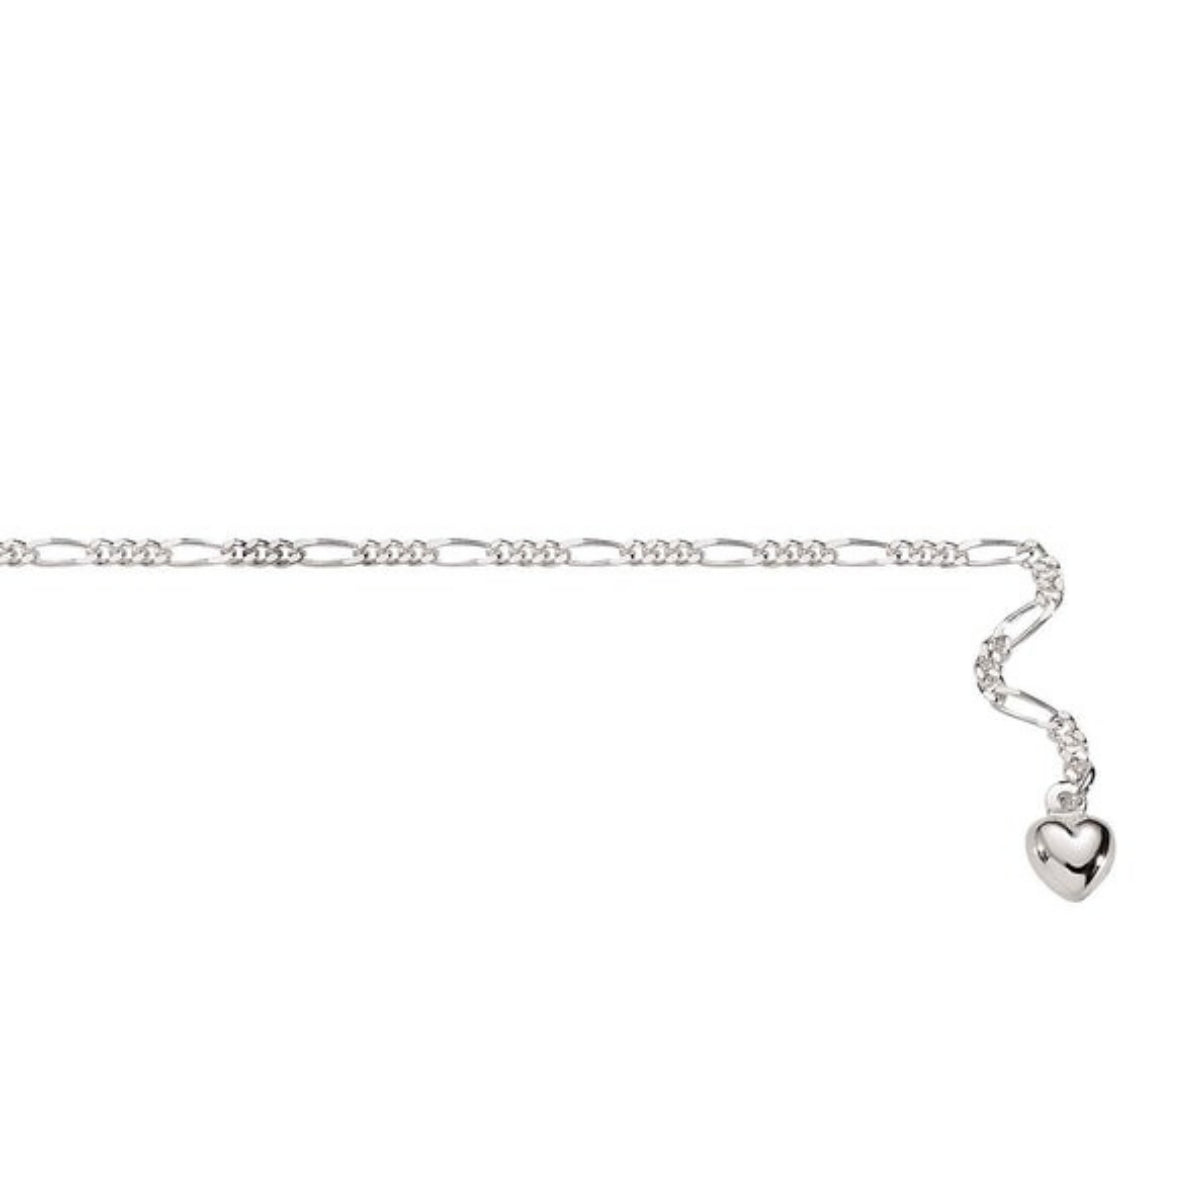 Anklet Silver polished puffed heart charm 26cm